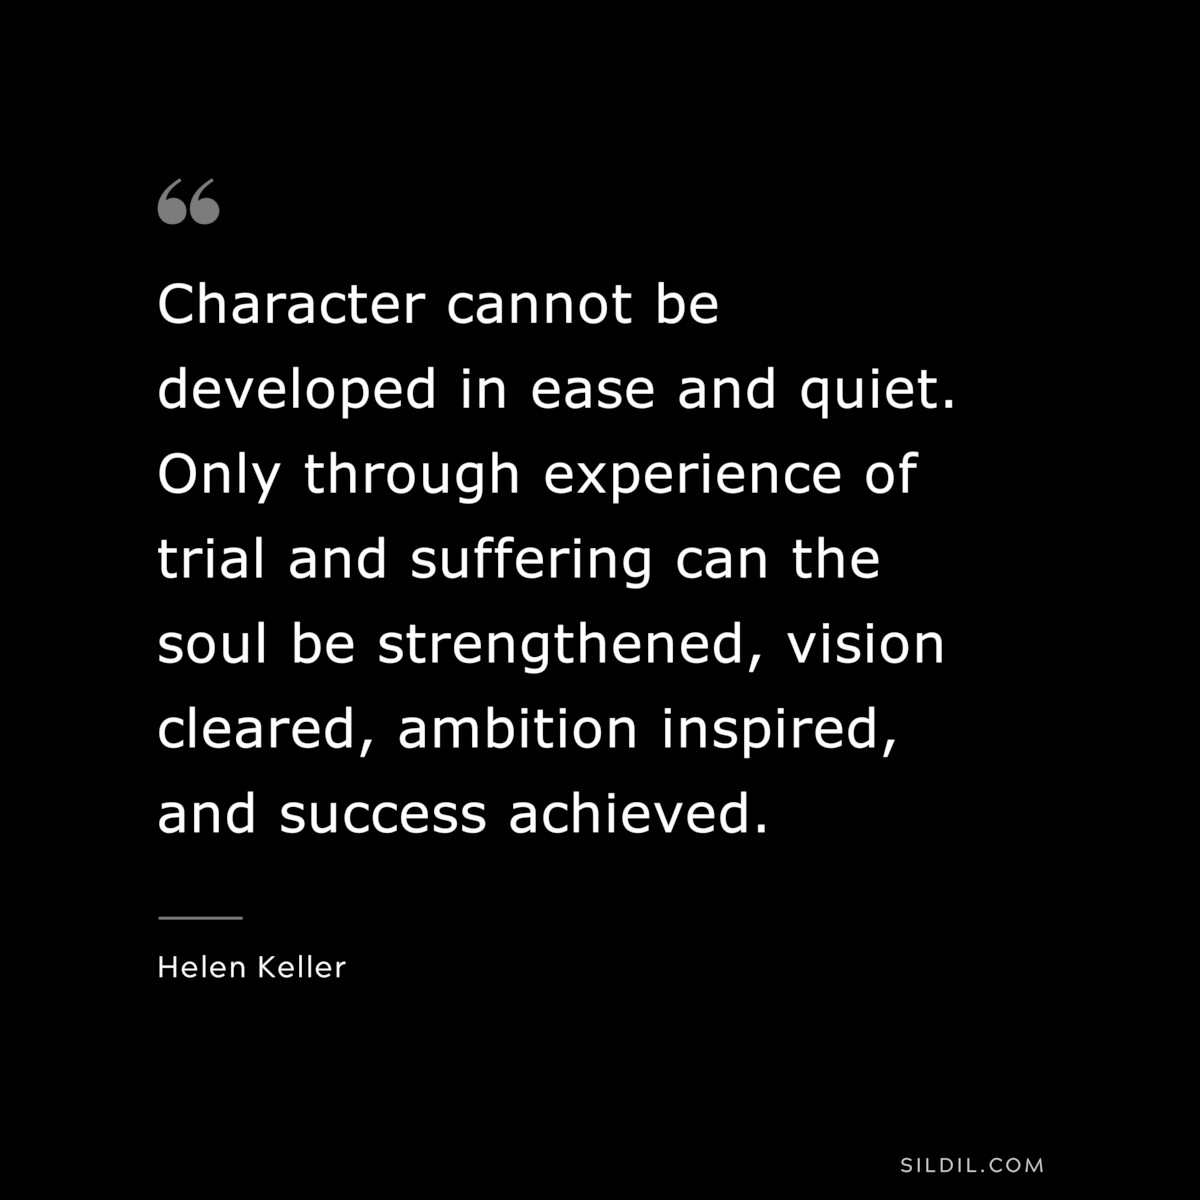 Character cannot be developed in ease and quiet. Only through experience of trial and suffering can the soul be strengthened, vision cleared, ambition inspired, and success achieved. ― Helen Keller